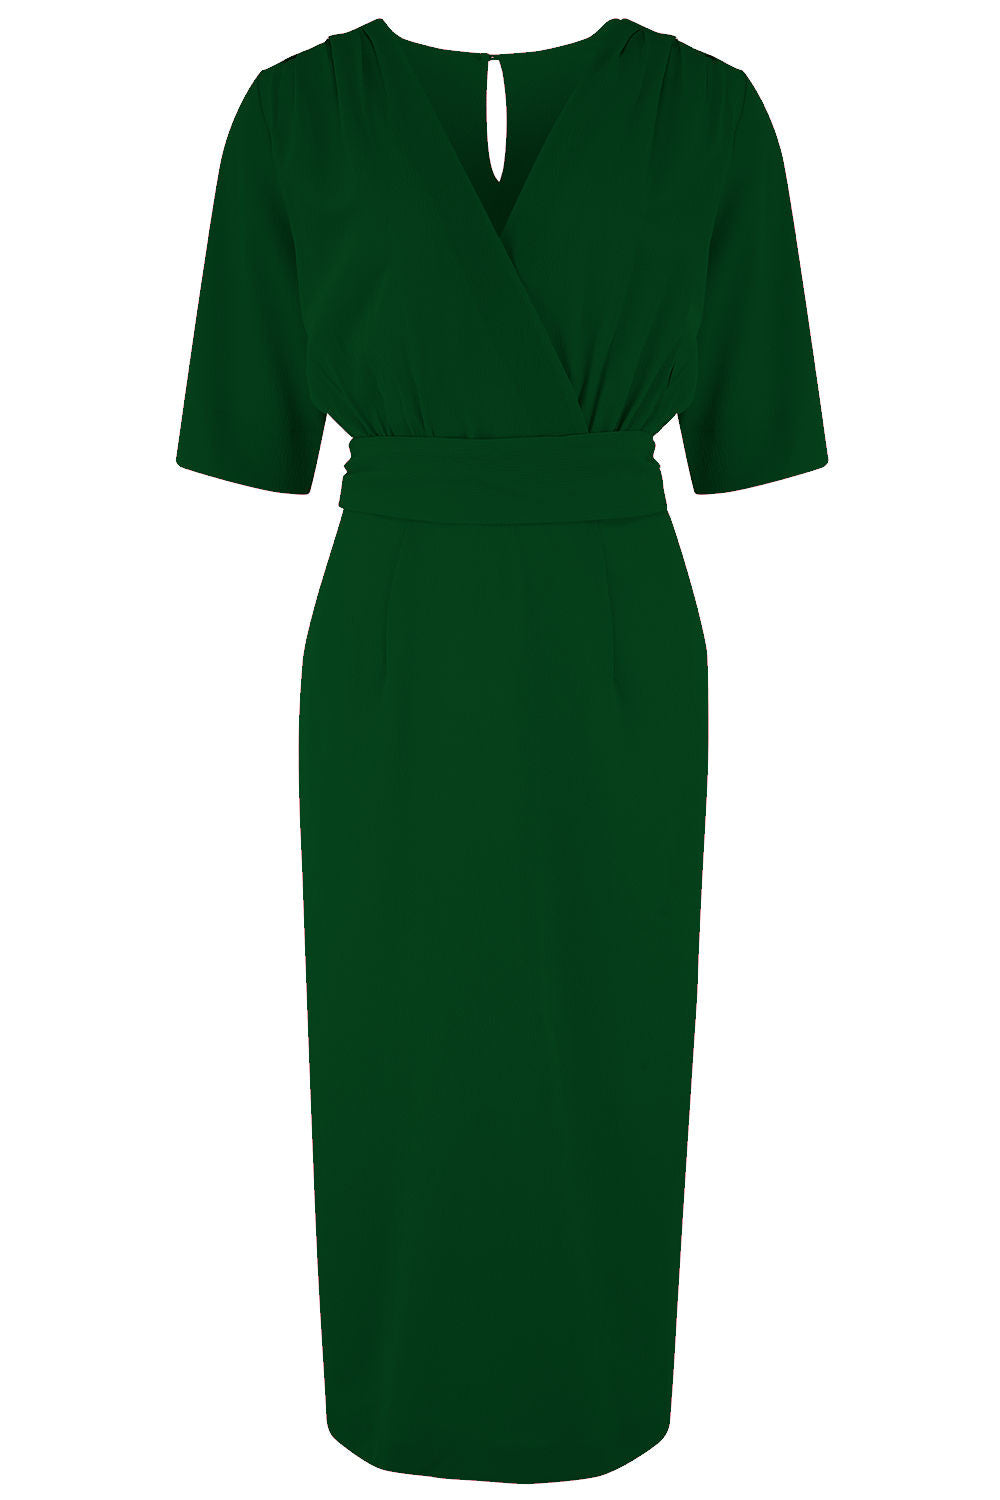 The “Evelyn" Wiggle Dress in Green, True Late 40s Early 50s Vintage Style - True and authentic vintage style clothing, inspired by the Classic styles of CC41 , WW2 and the fun 1950s RocknRoll era, for everyday wear plus events like Goodwood Revival, Twinwood Festival and Viva Las Vegas Rockabilly Weekend Rock n Romance Rock n Romance